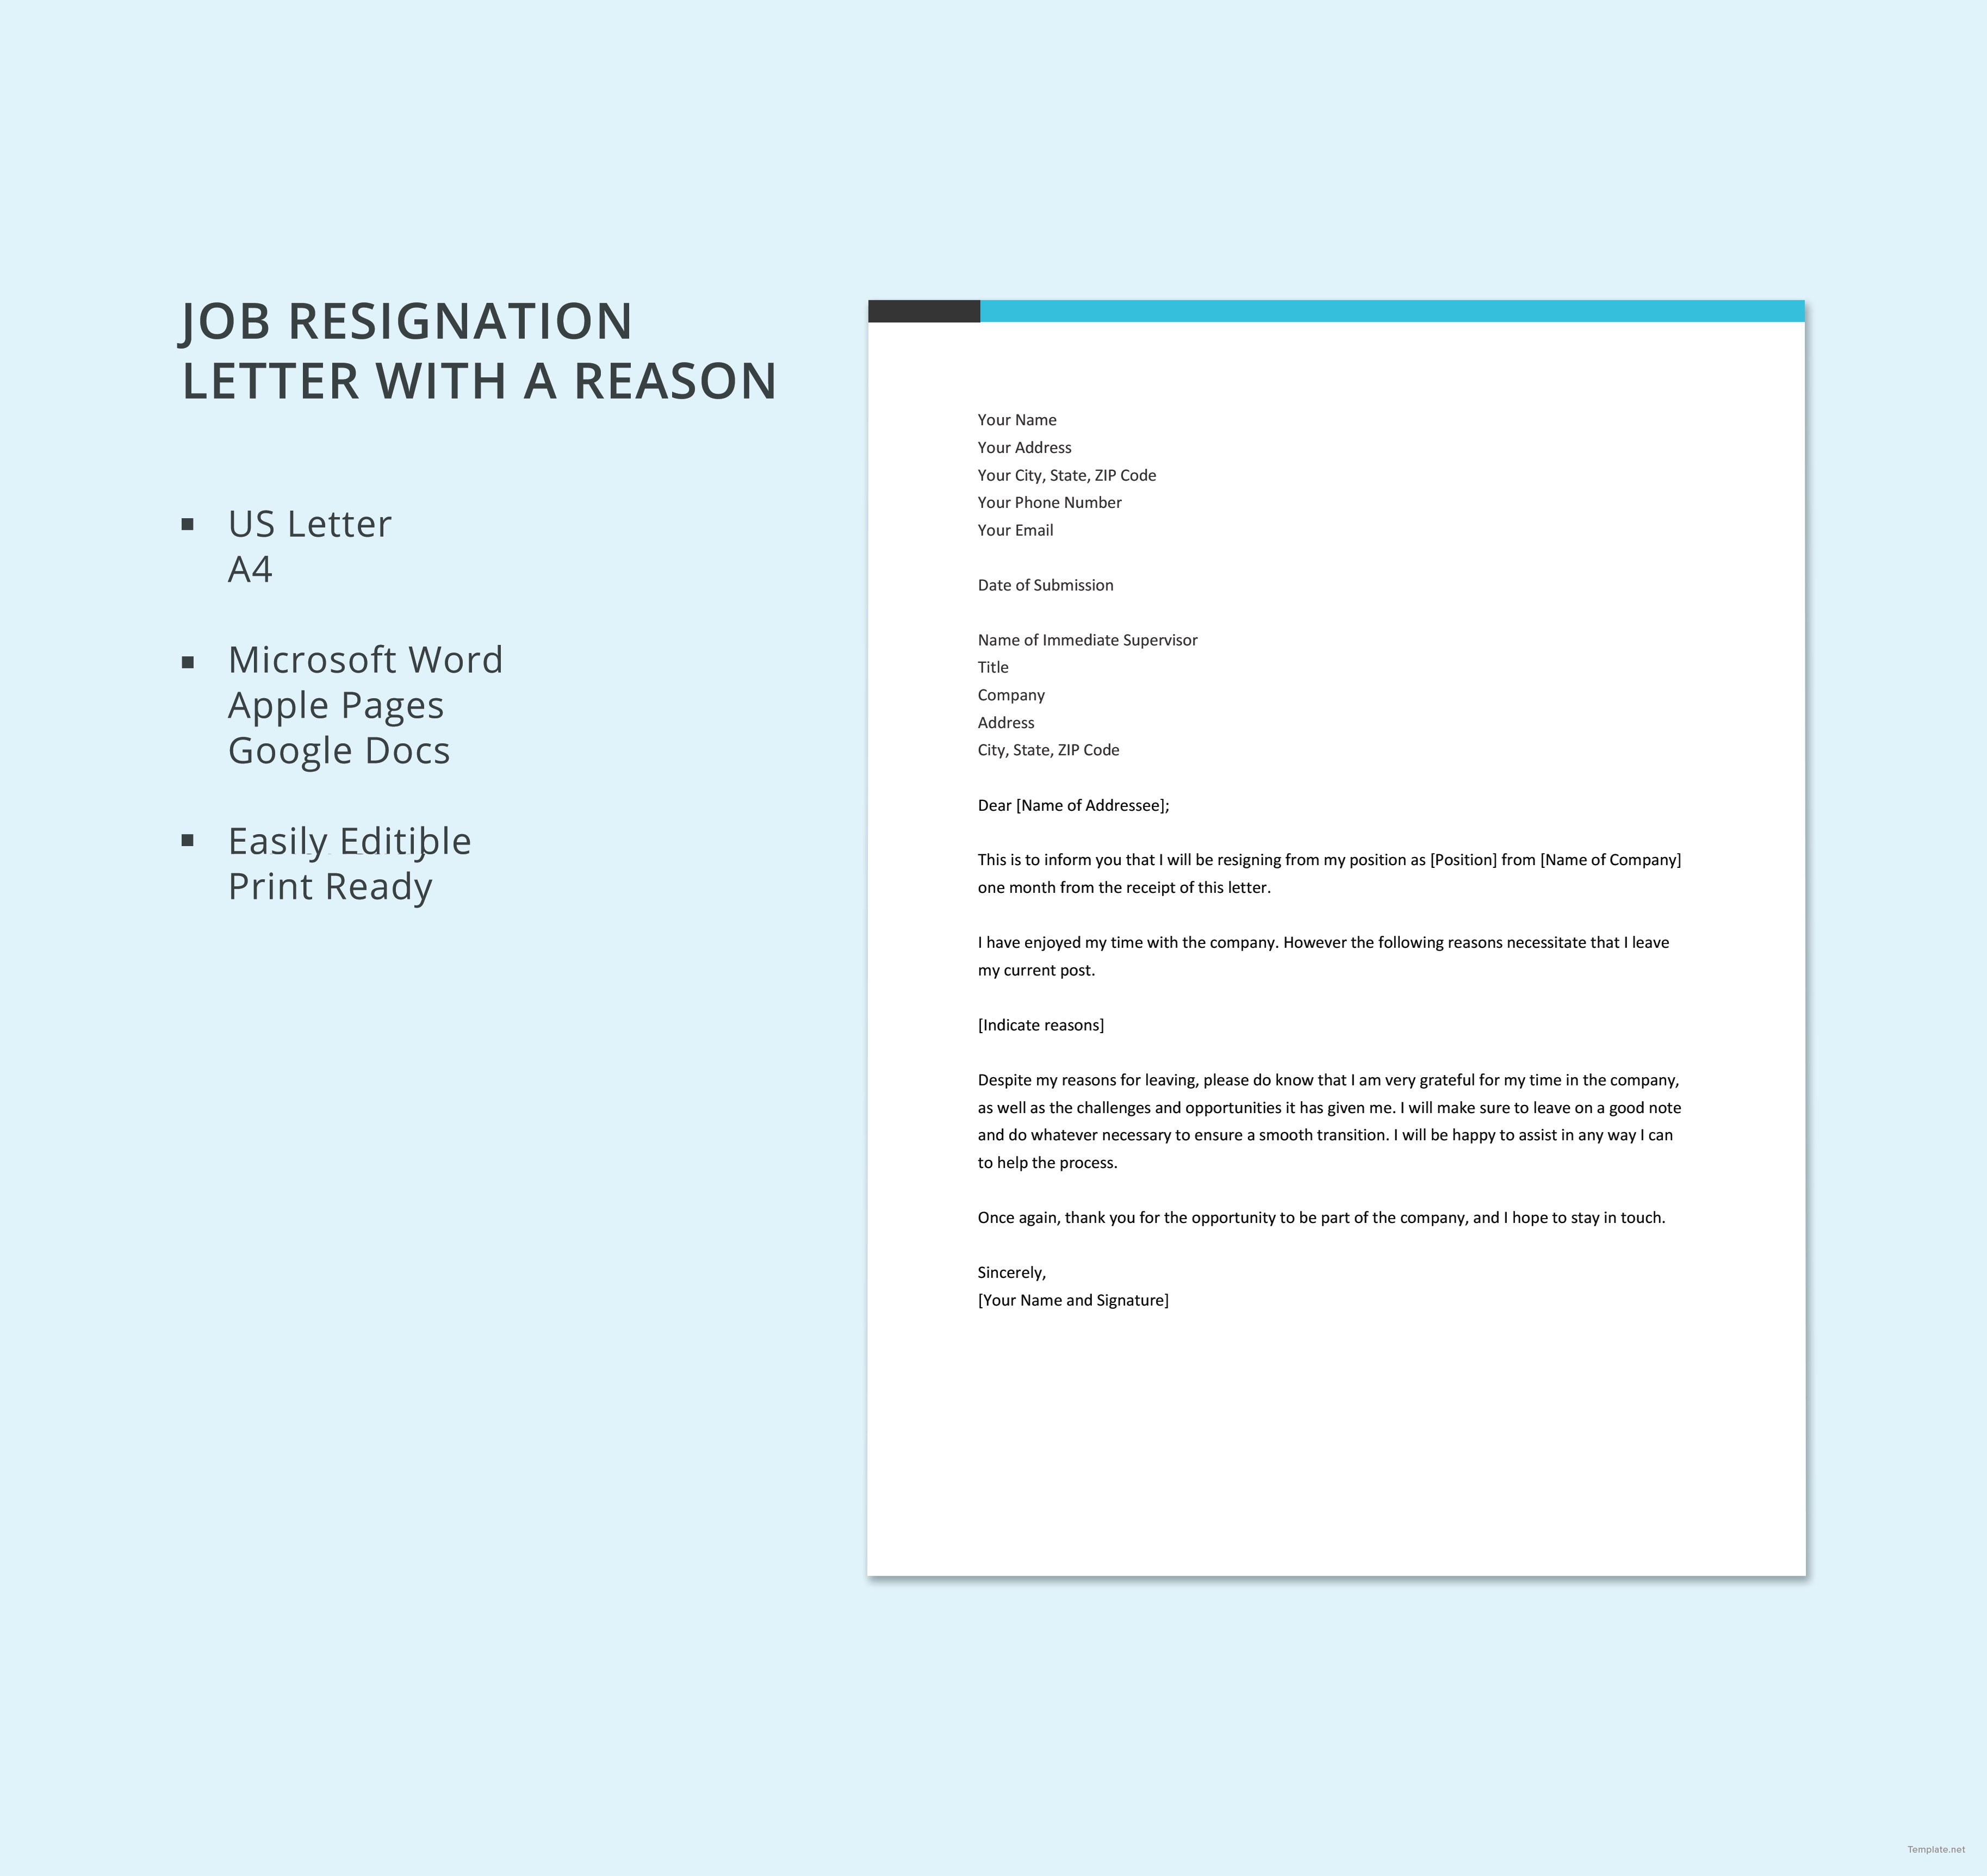 Free Job Resignation Letter Template With A Reason In Microsoft Word 